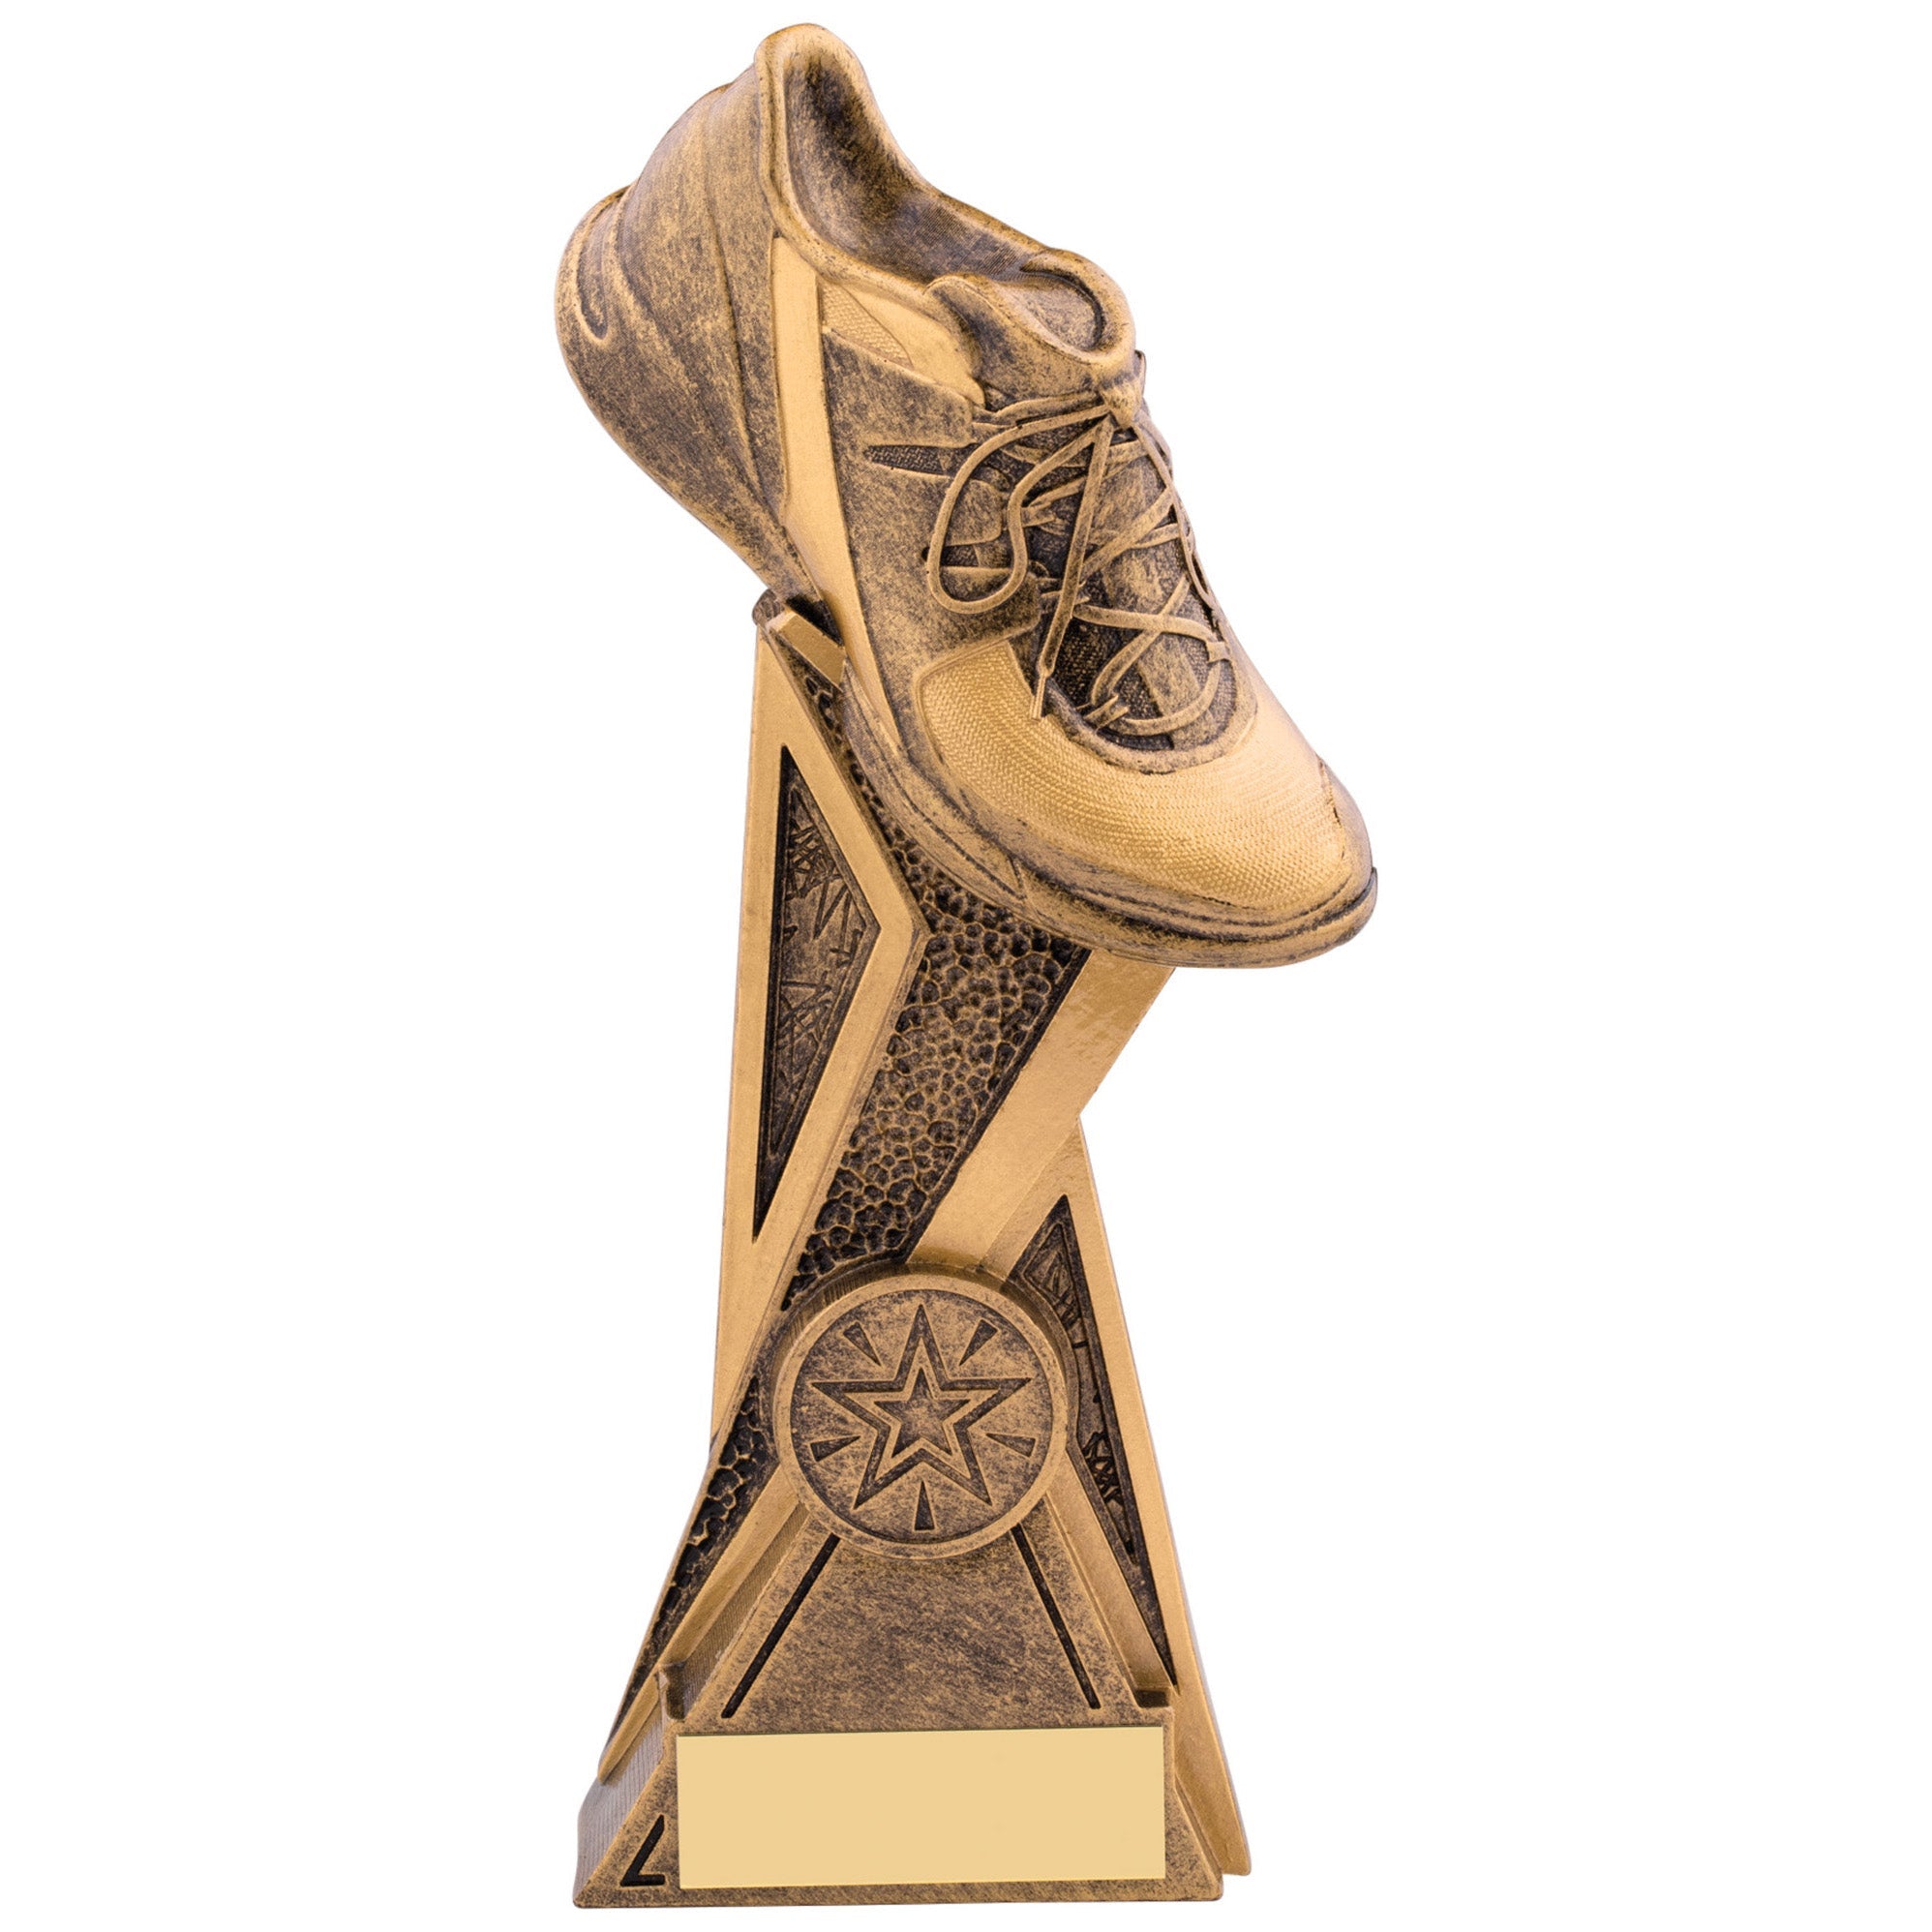 Running Shoe Storm Award - Available with Engraving and Custom 1" Centre